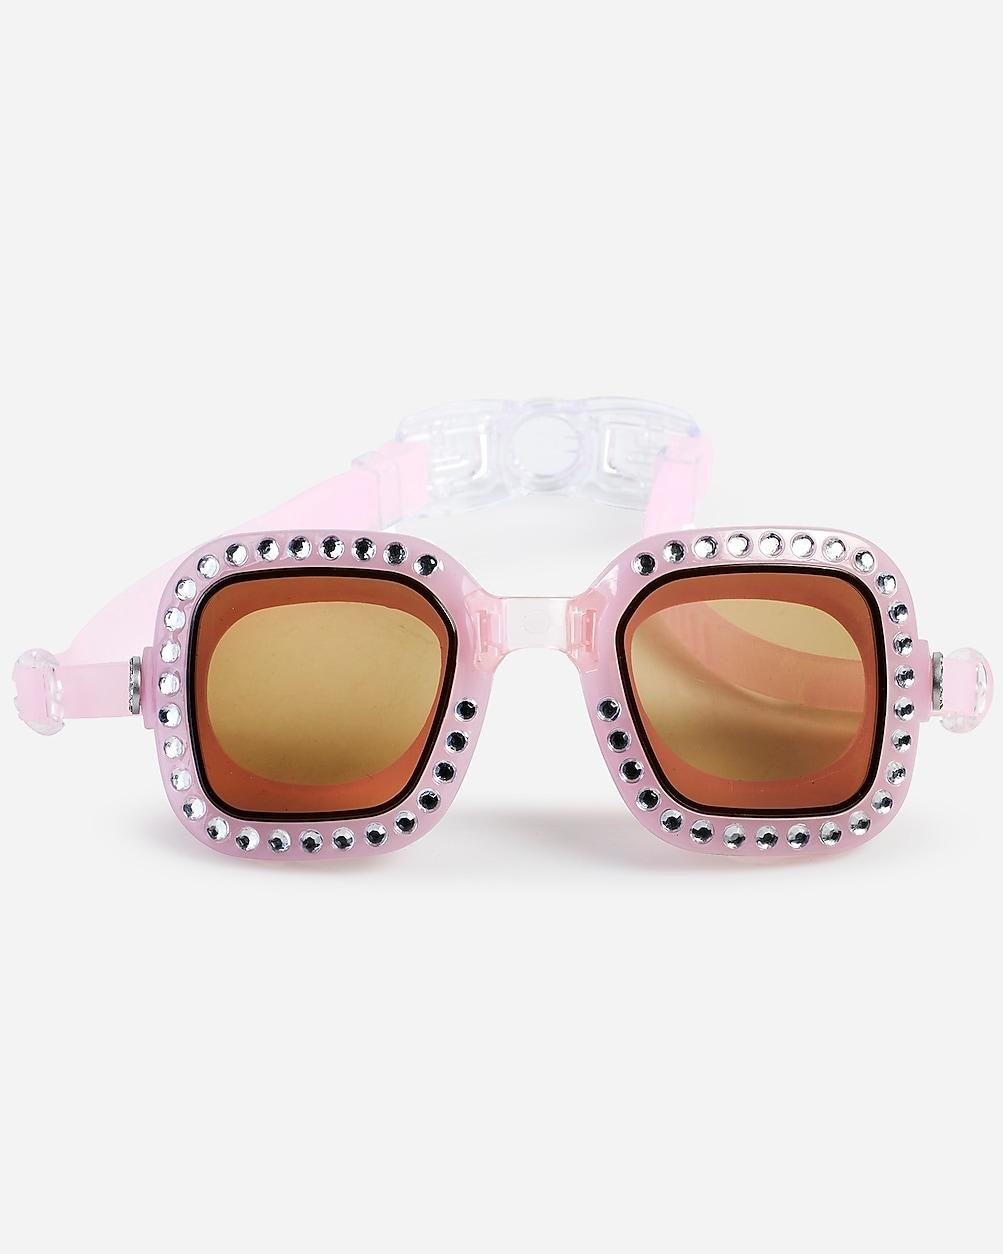 Bling2o® girls' bring vibrancy goggles by J.CREW